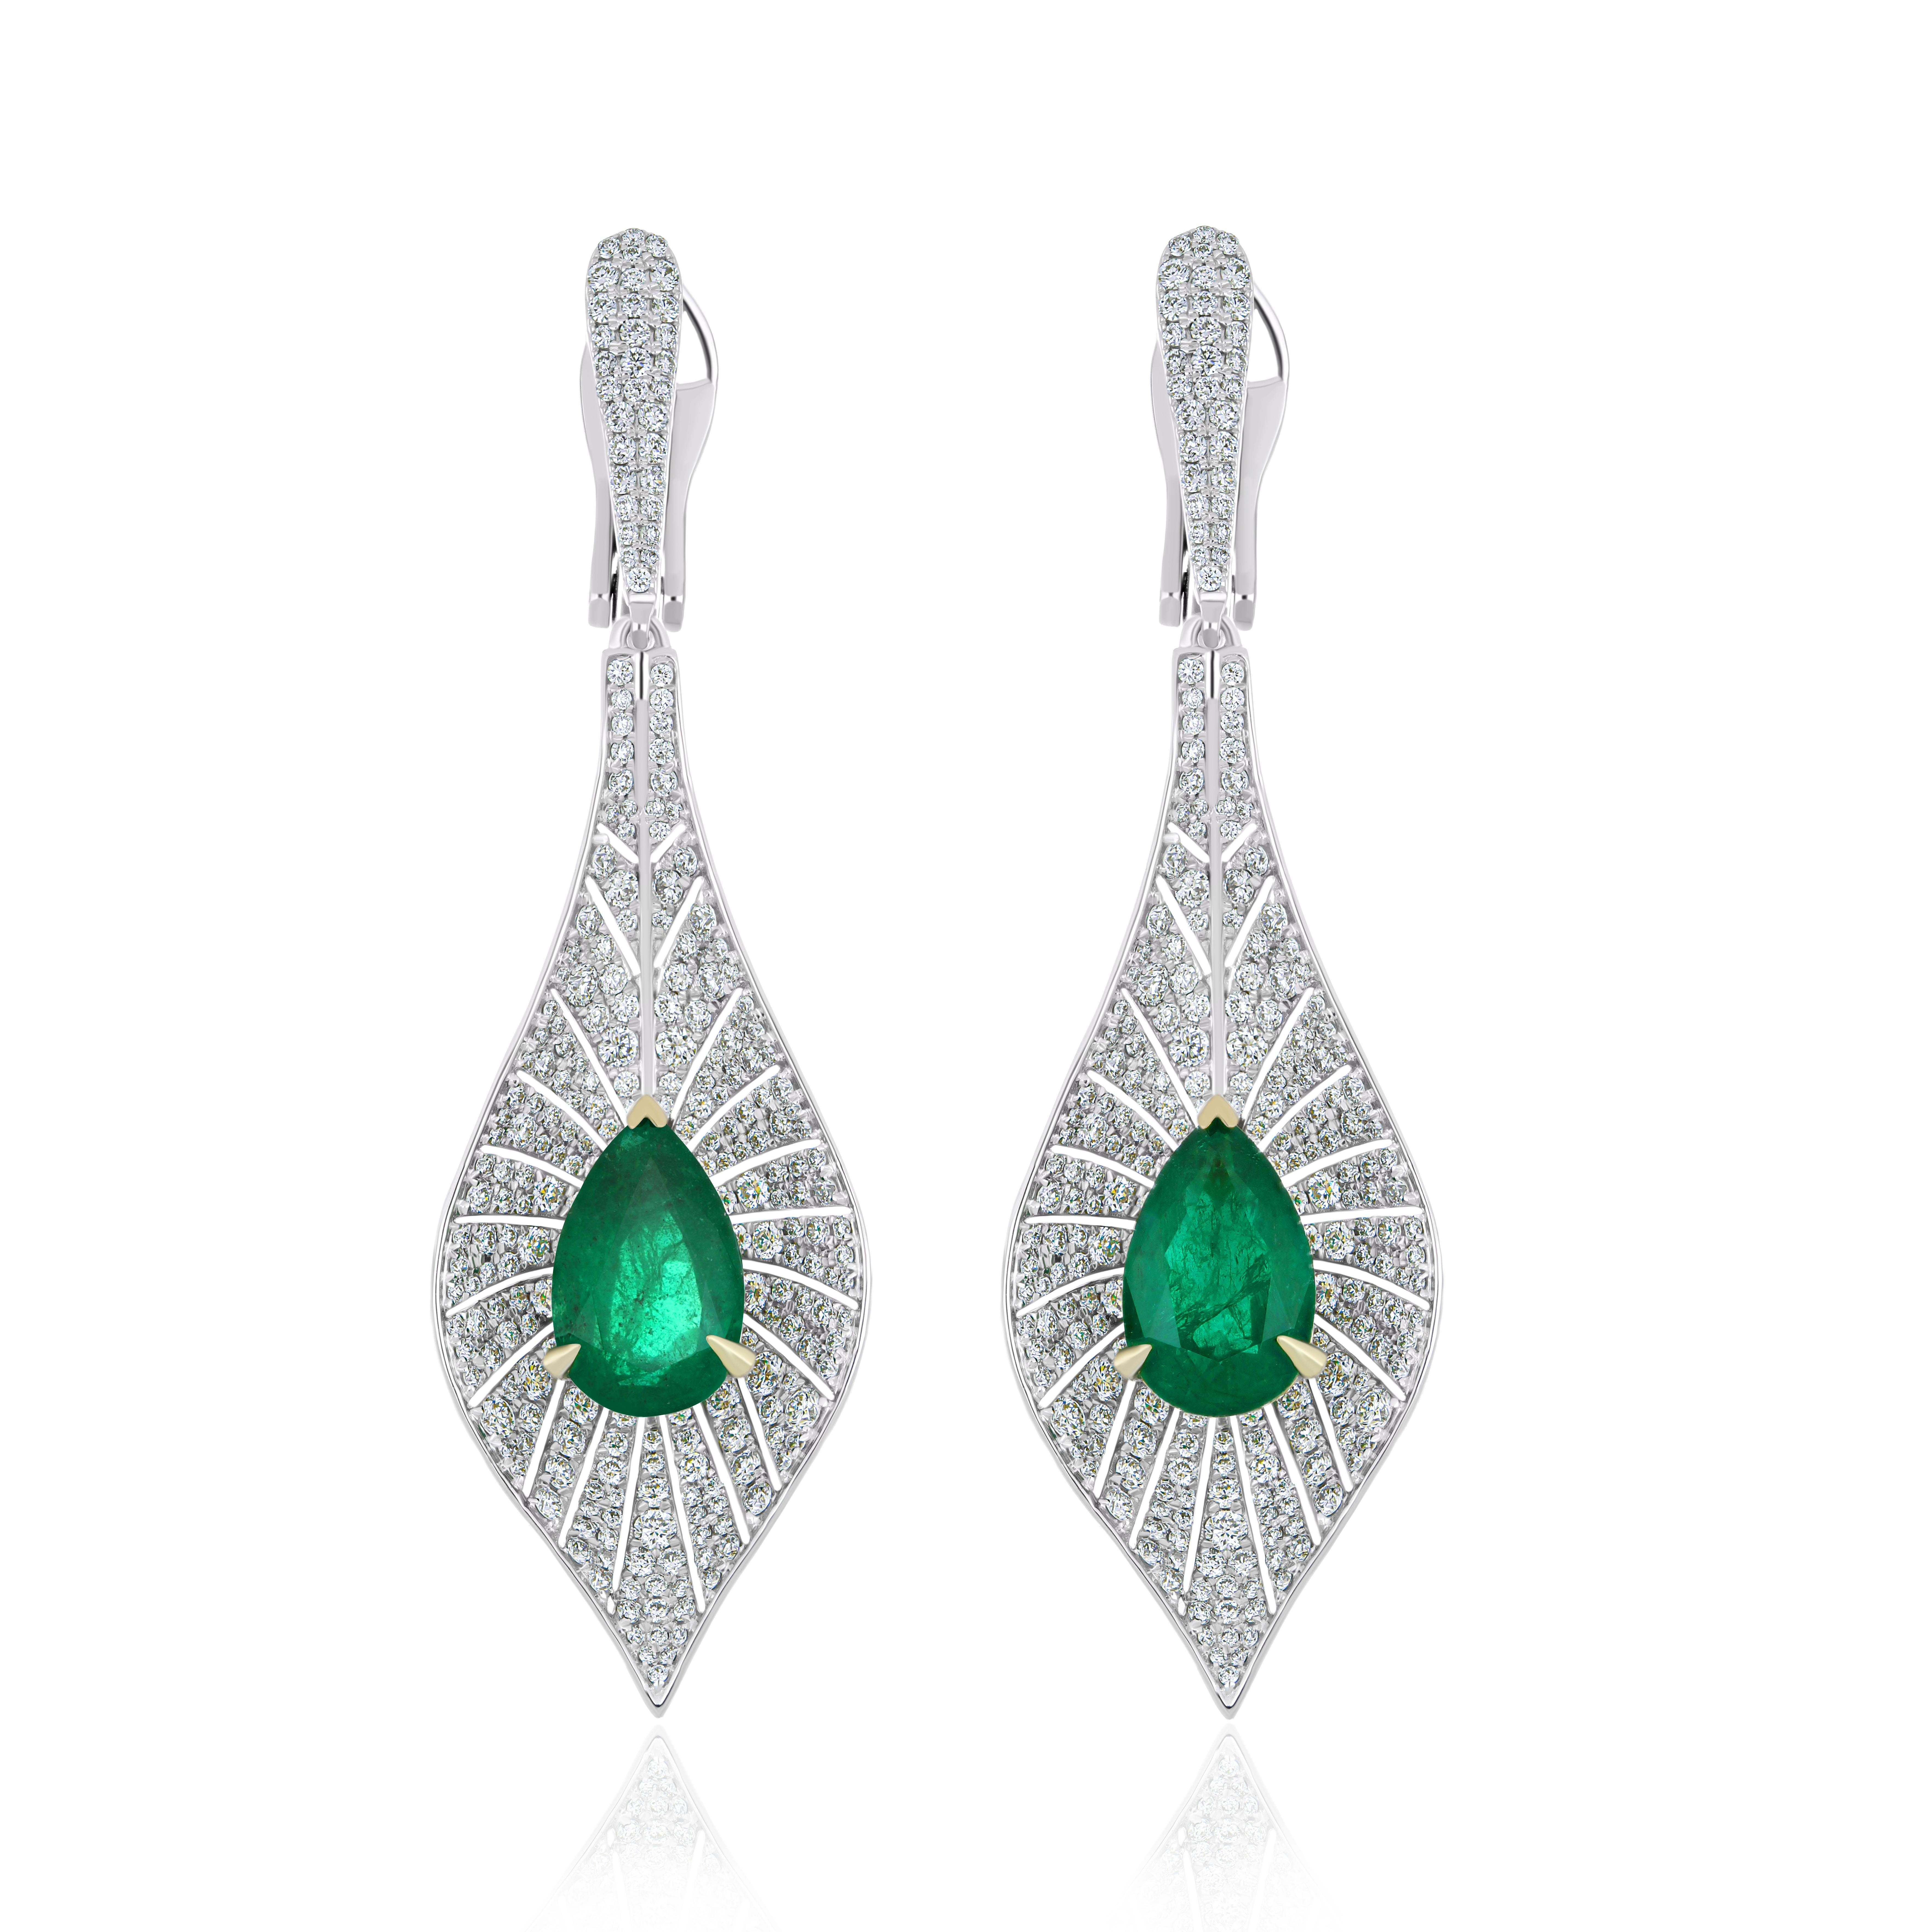 Elegant and Exquisitely detailed White Gold earrings, with 6.2 CT's (total approx.) Emerald Pear Shape, accented with micro pave Diamonds, weighing approx.  3.05 CT's. (total approx.). total carat weight. Beautifully Hand-Crafted Earring in 18 Karat